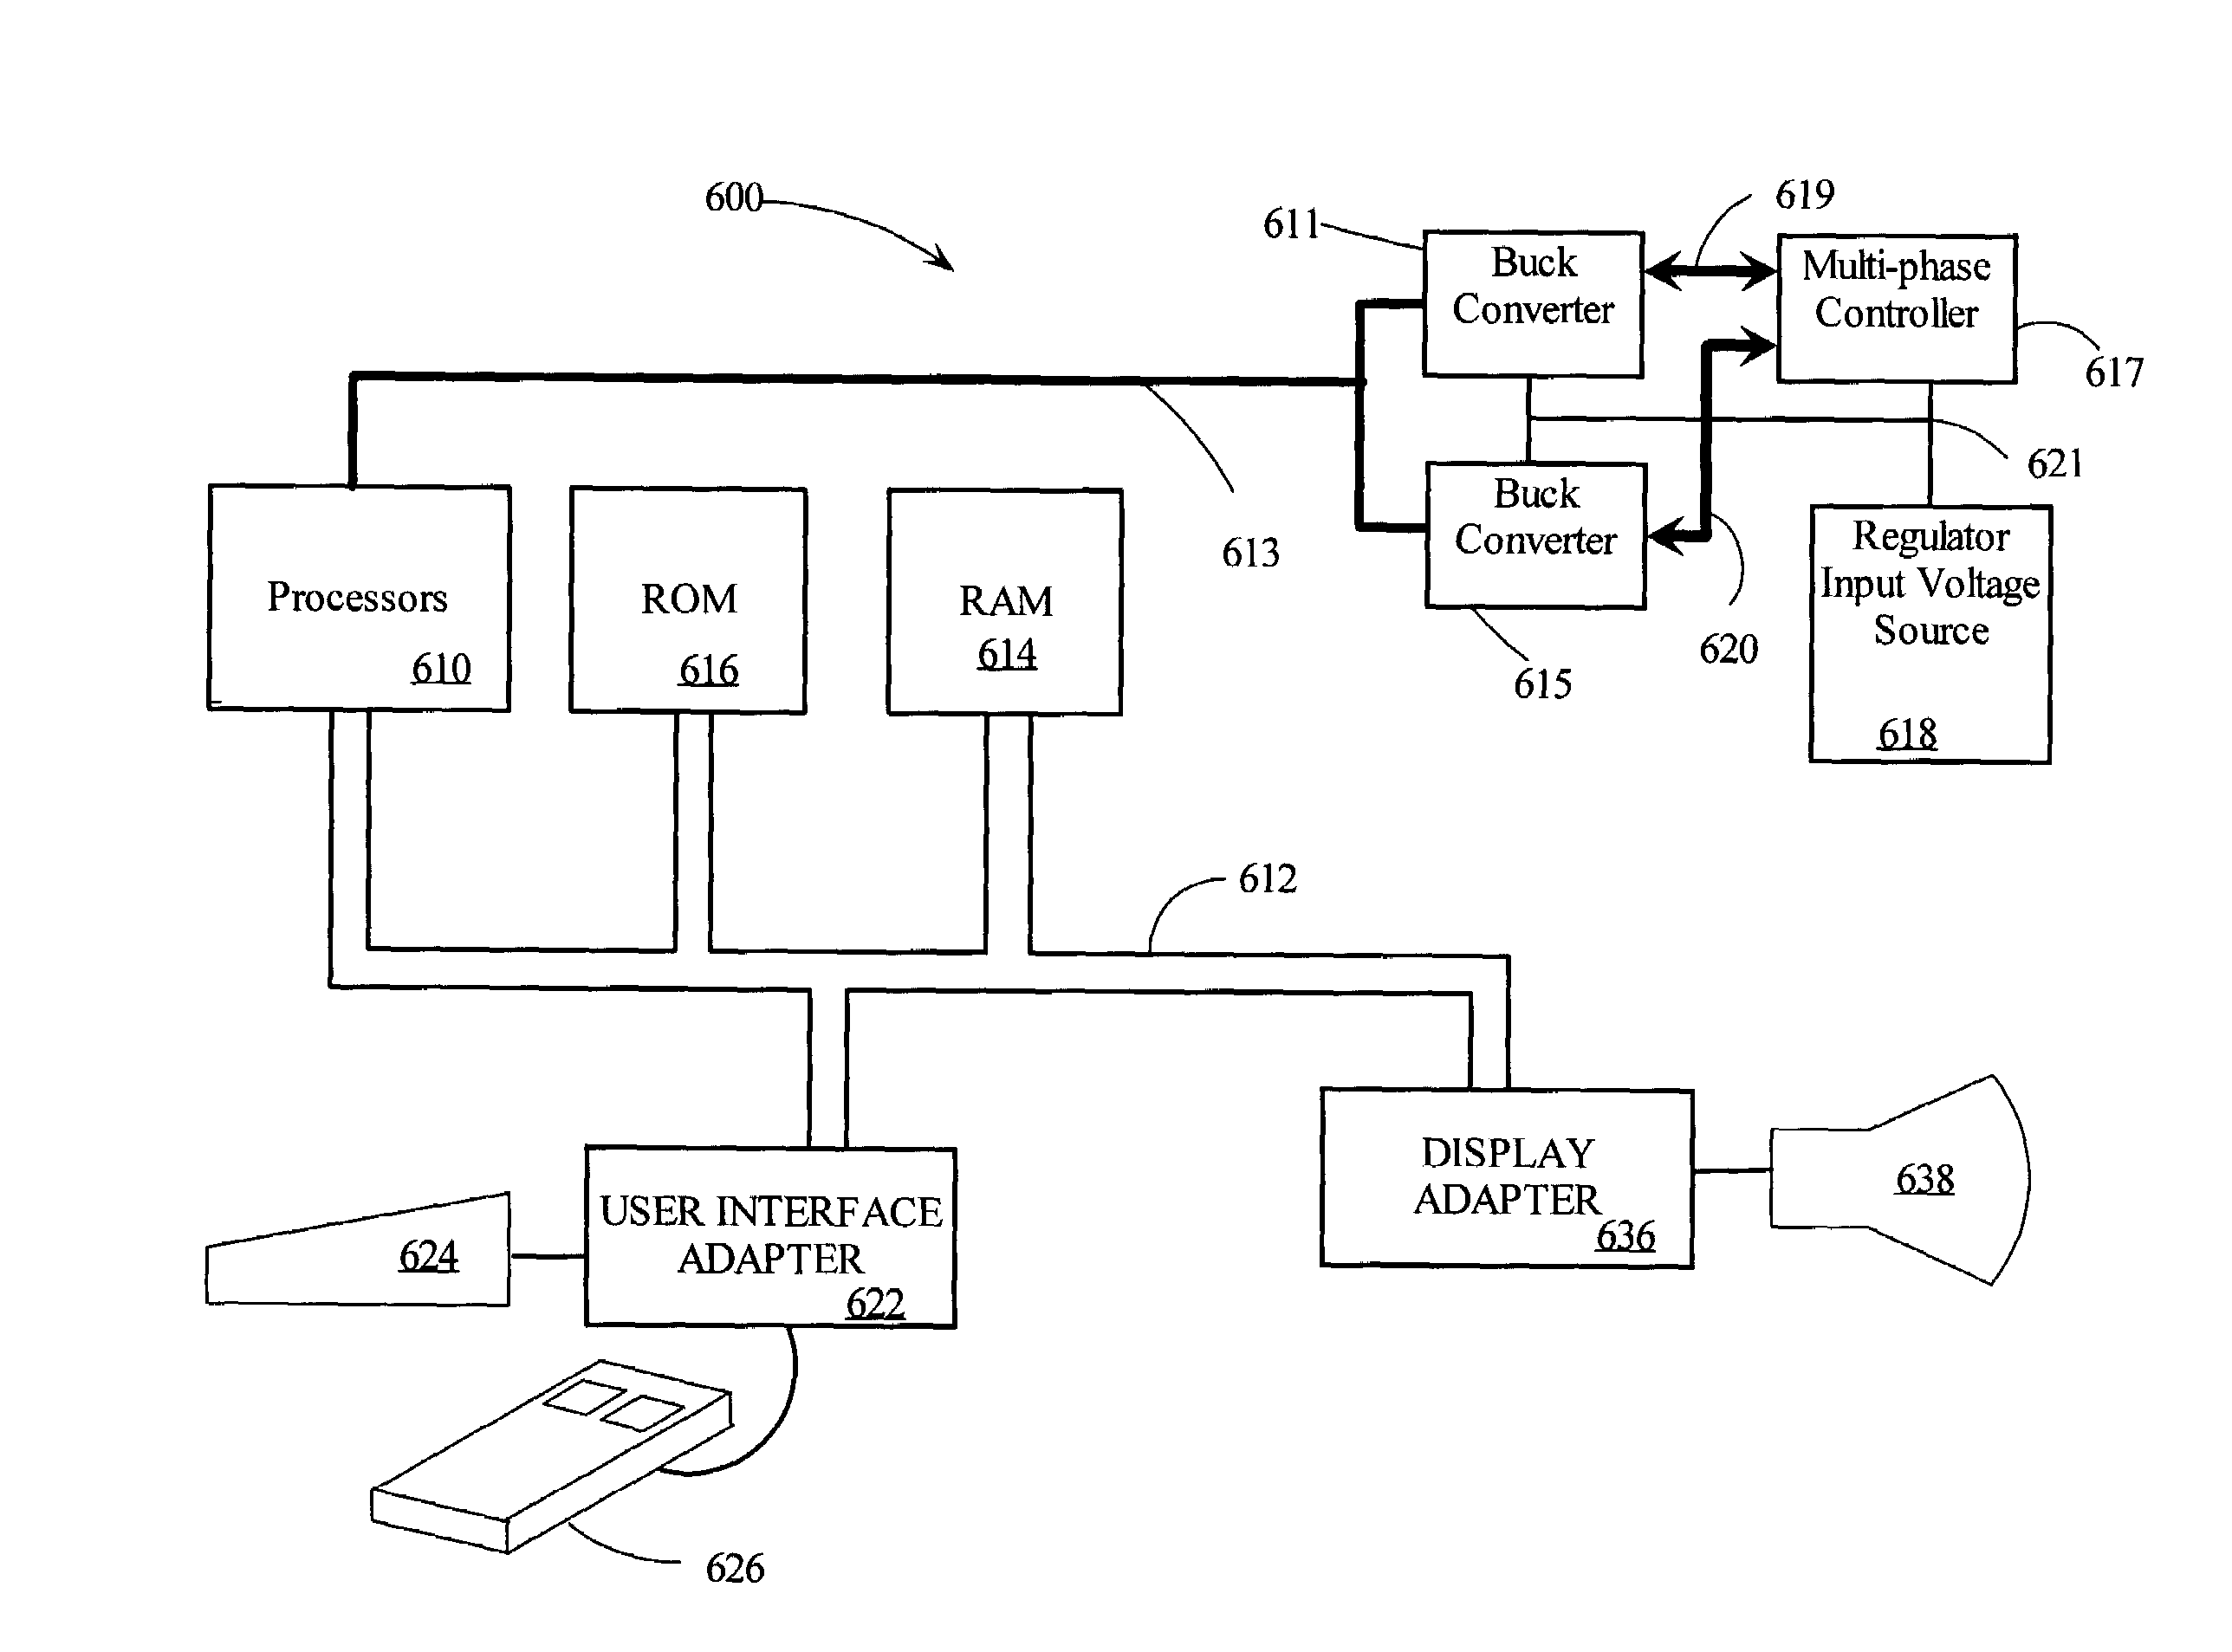 Peak current sharing in a multi-phase buck converter power system